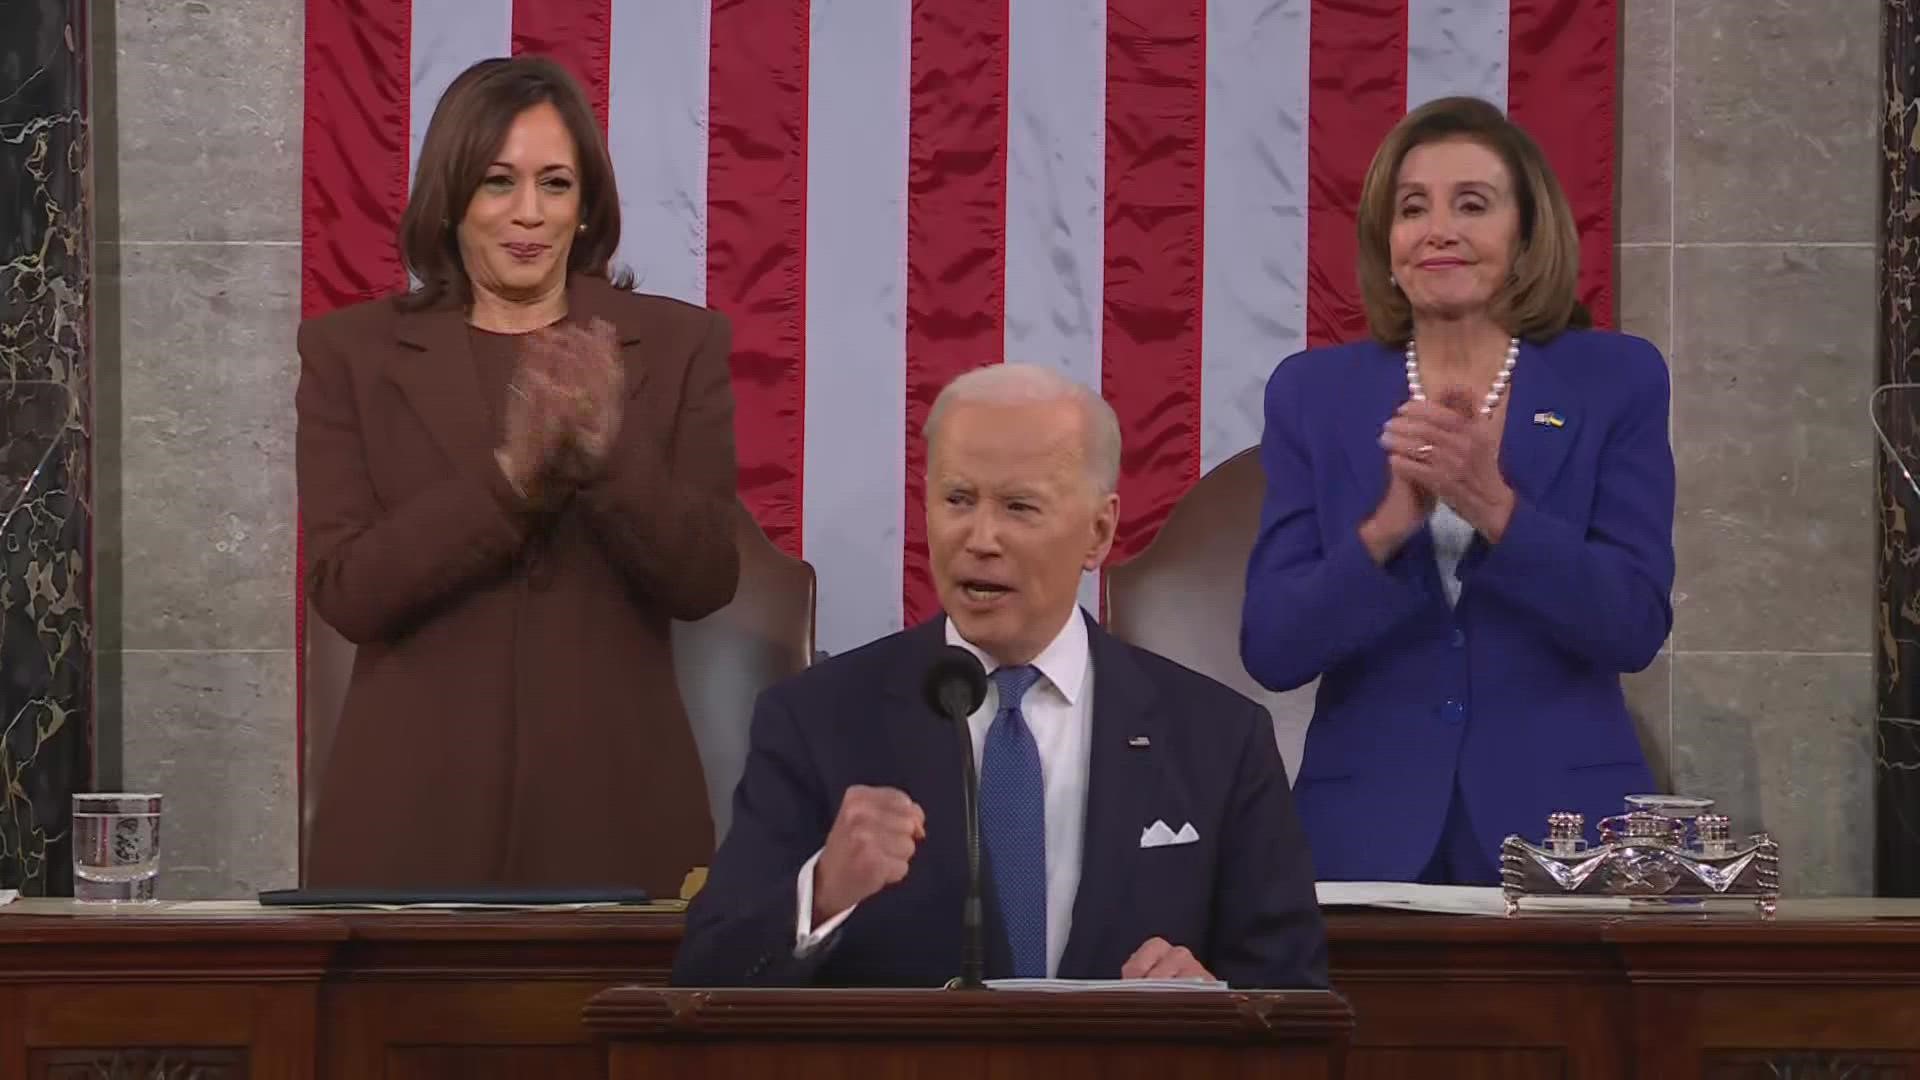 "The state of the union is strong because you, the American people, are strong," said Biden as he concluded his State of the Union address.